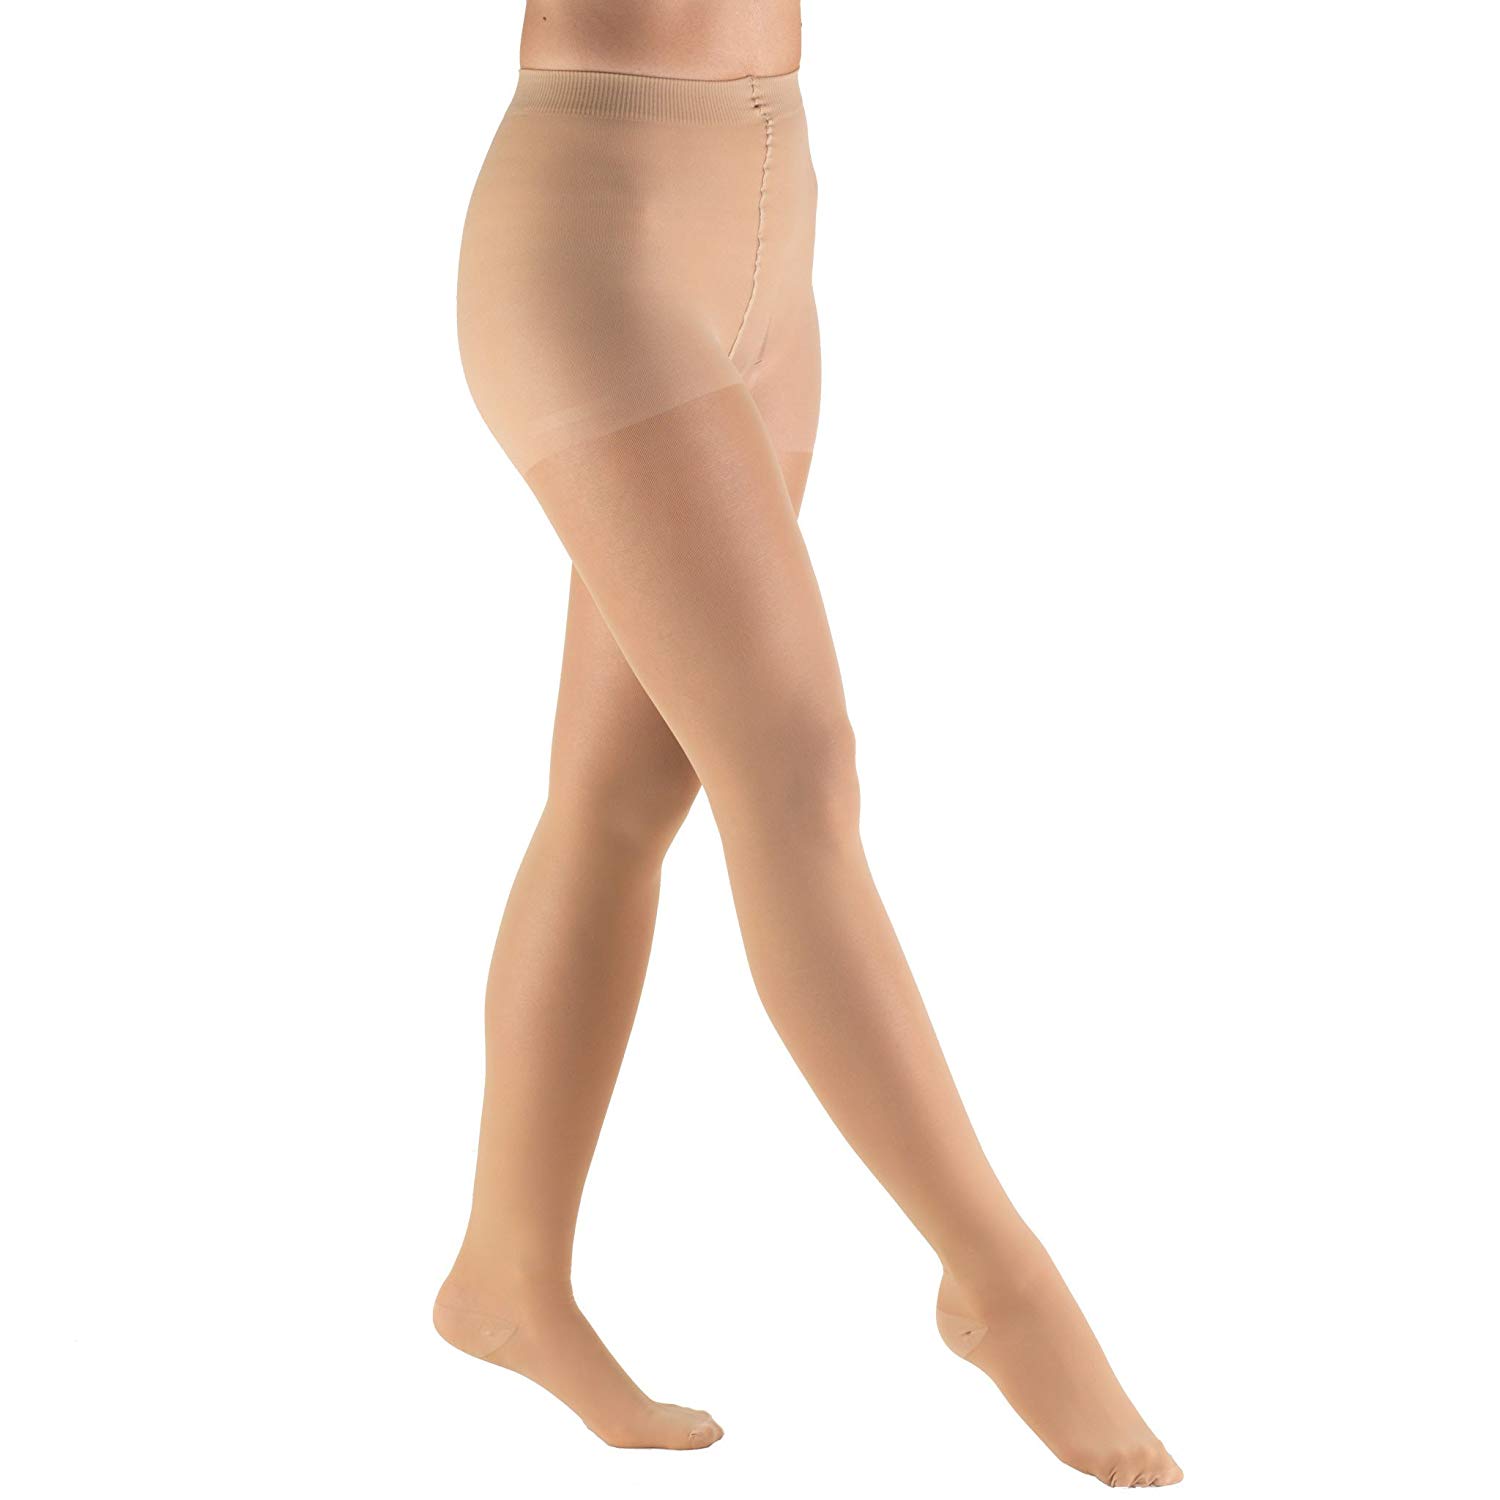 What is the difference between compression pantyhose and regular tights? 2